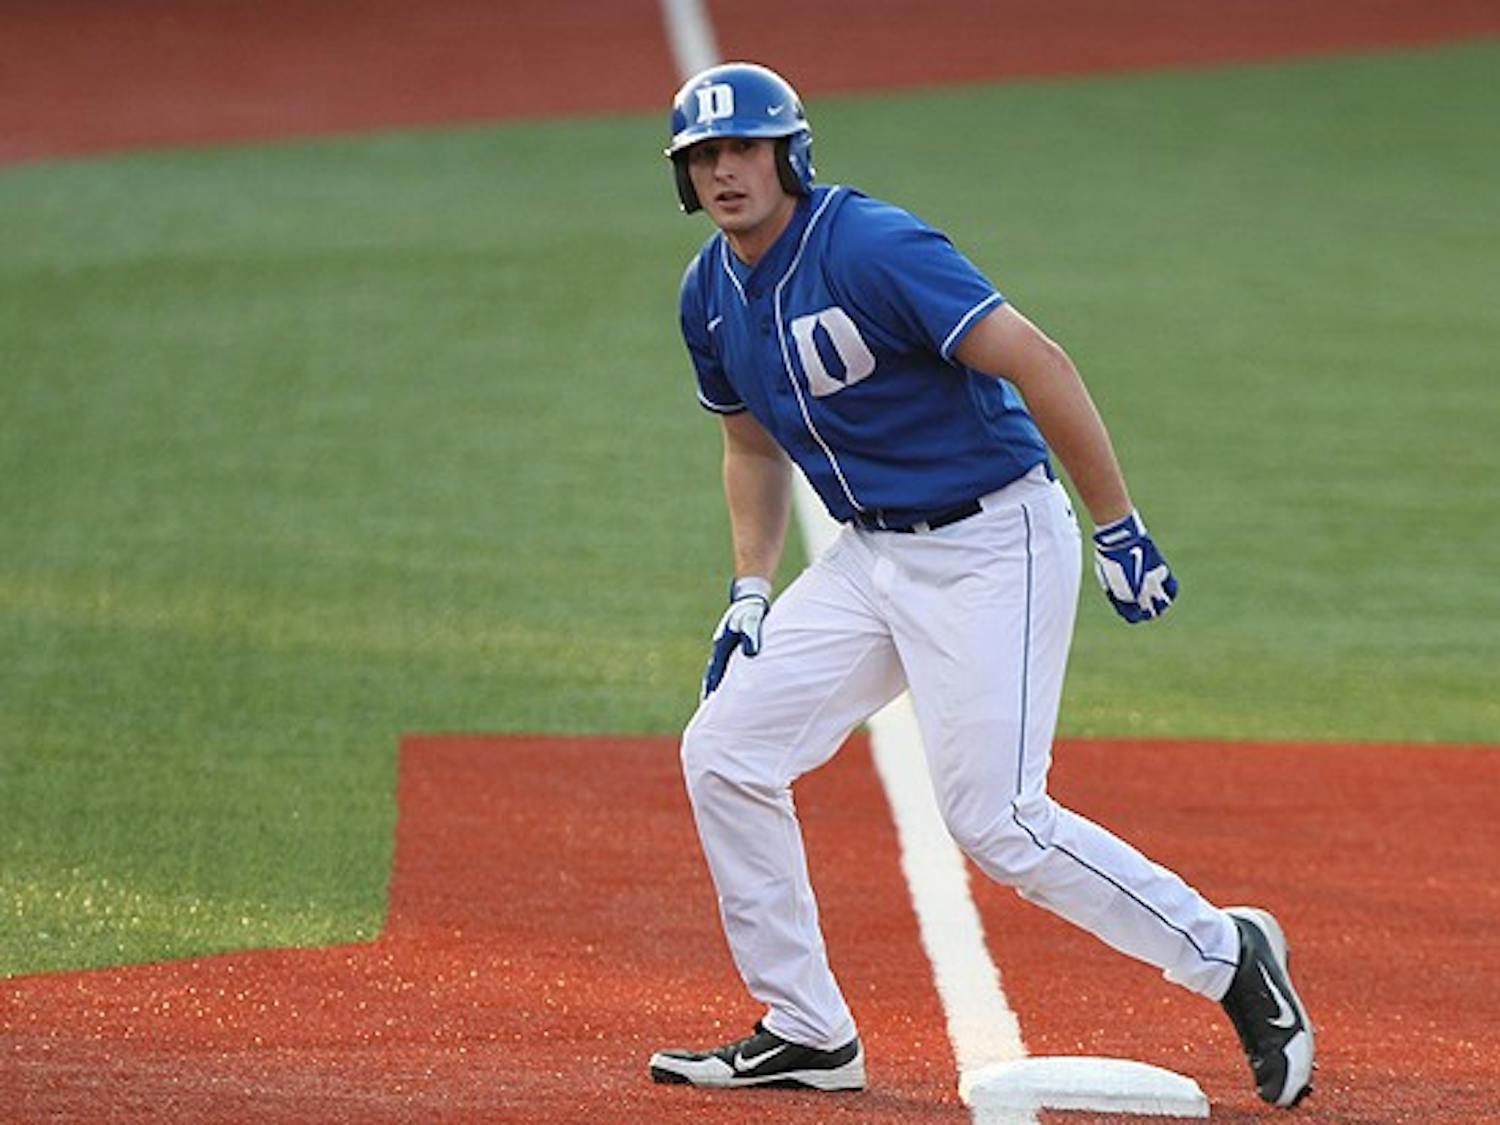 Chris Marconcini’s 3-for-4 performance powered Duke to a comeback victory.